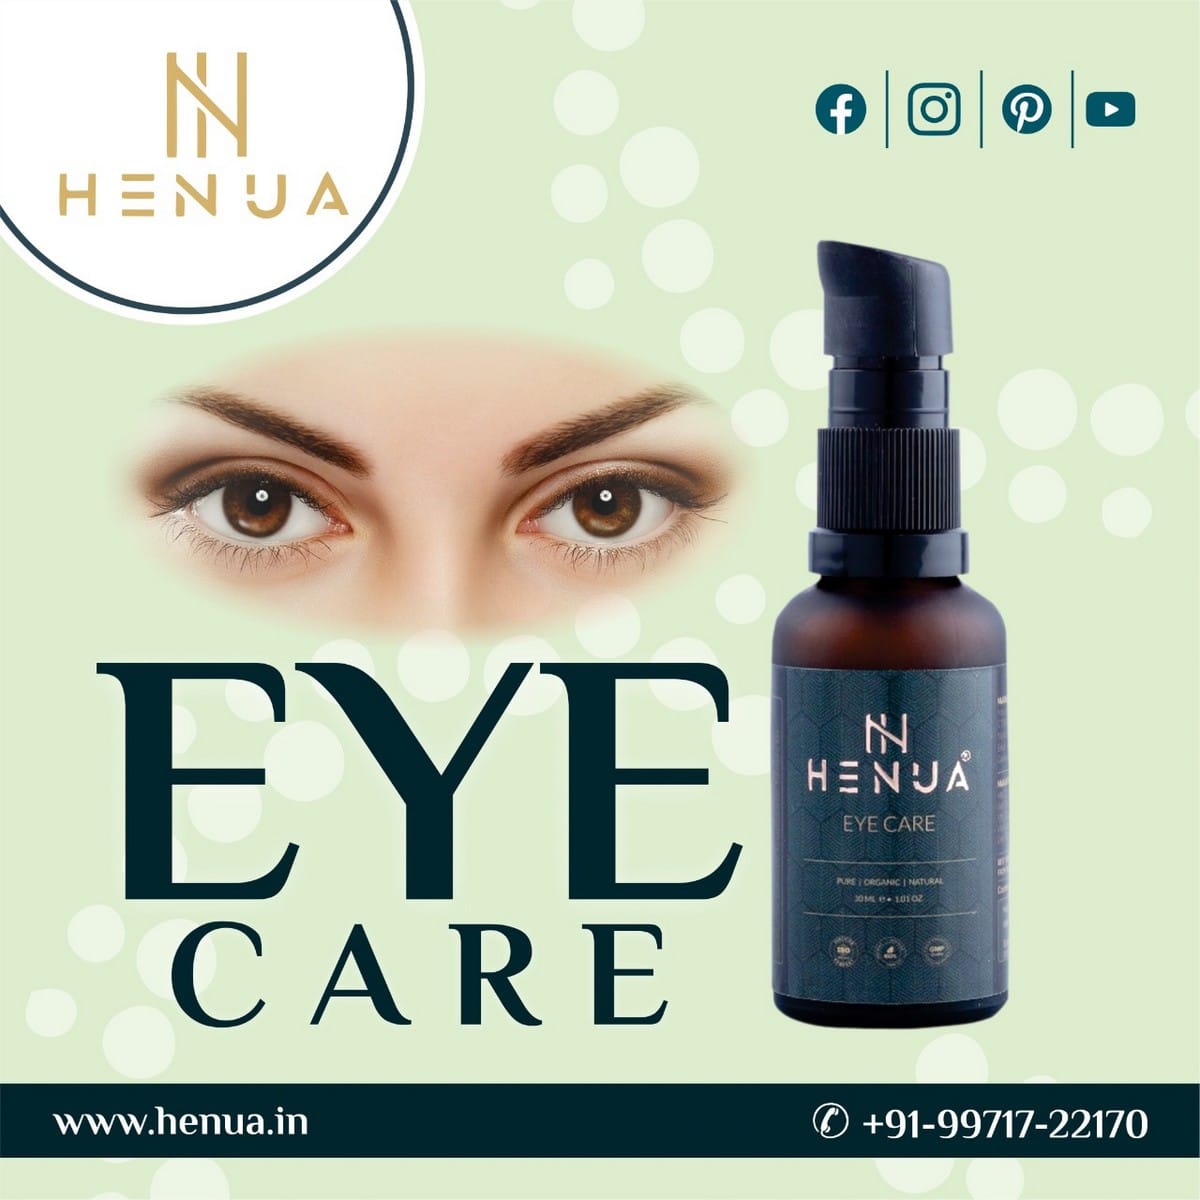 Natural and Organic Eyecare Solution for You